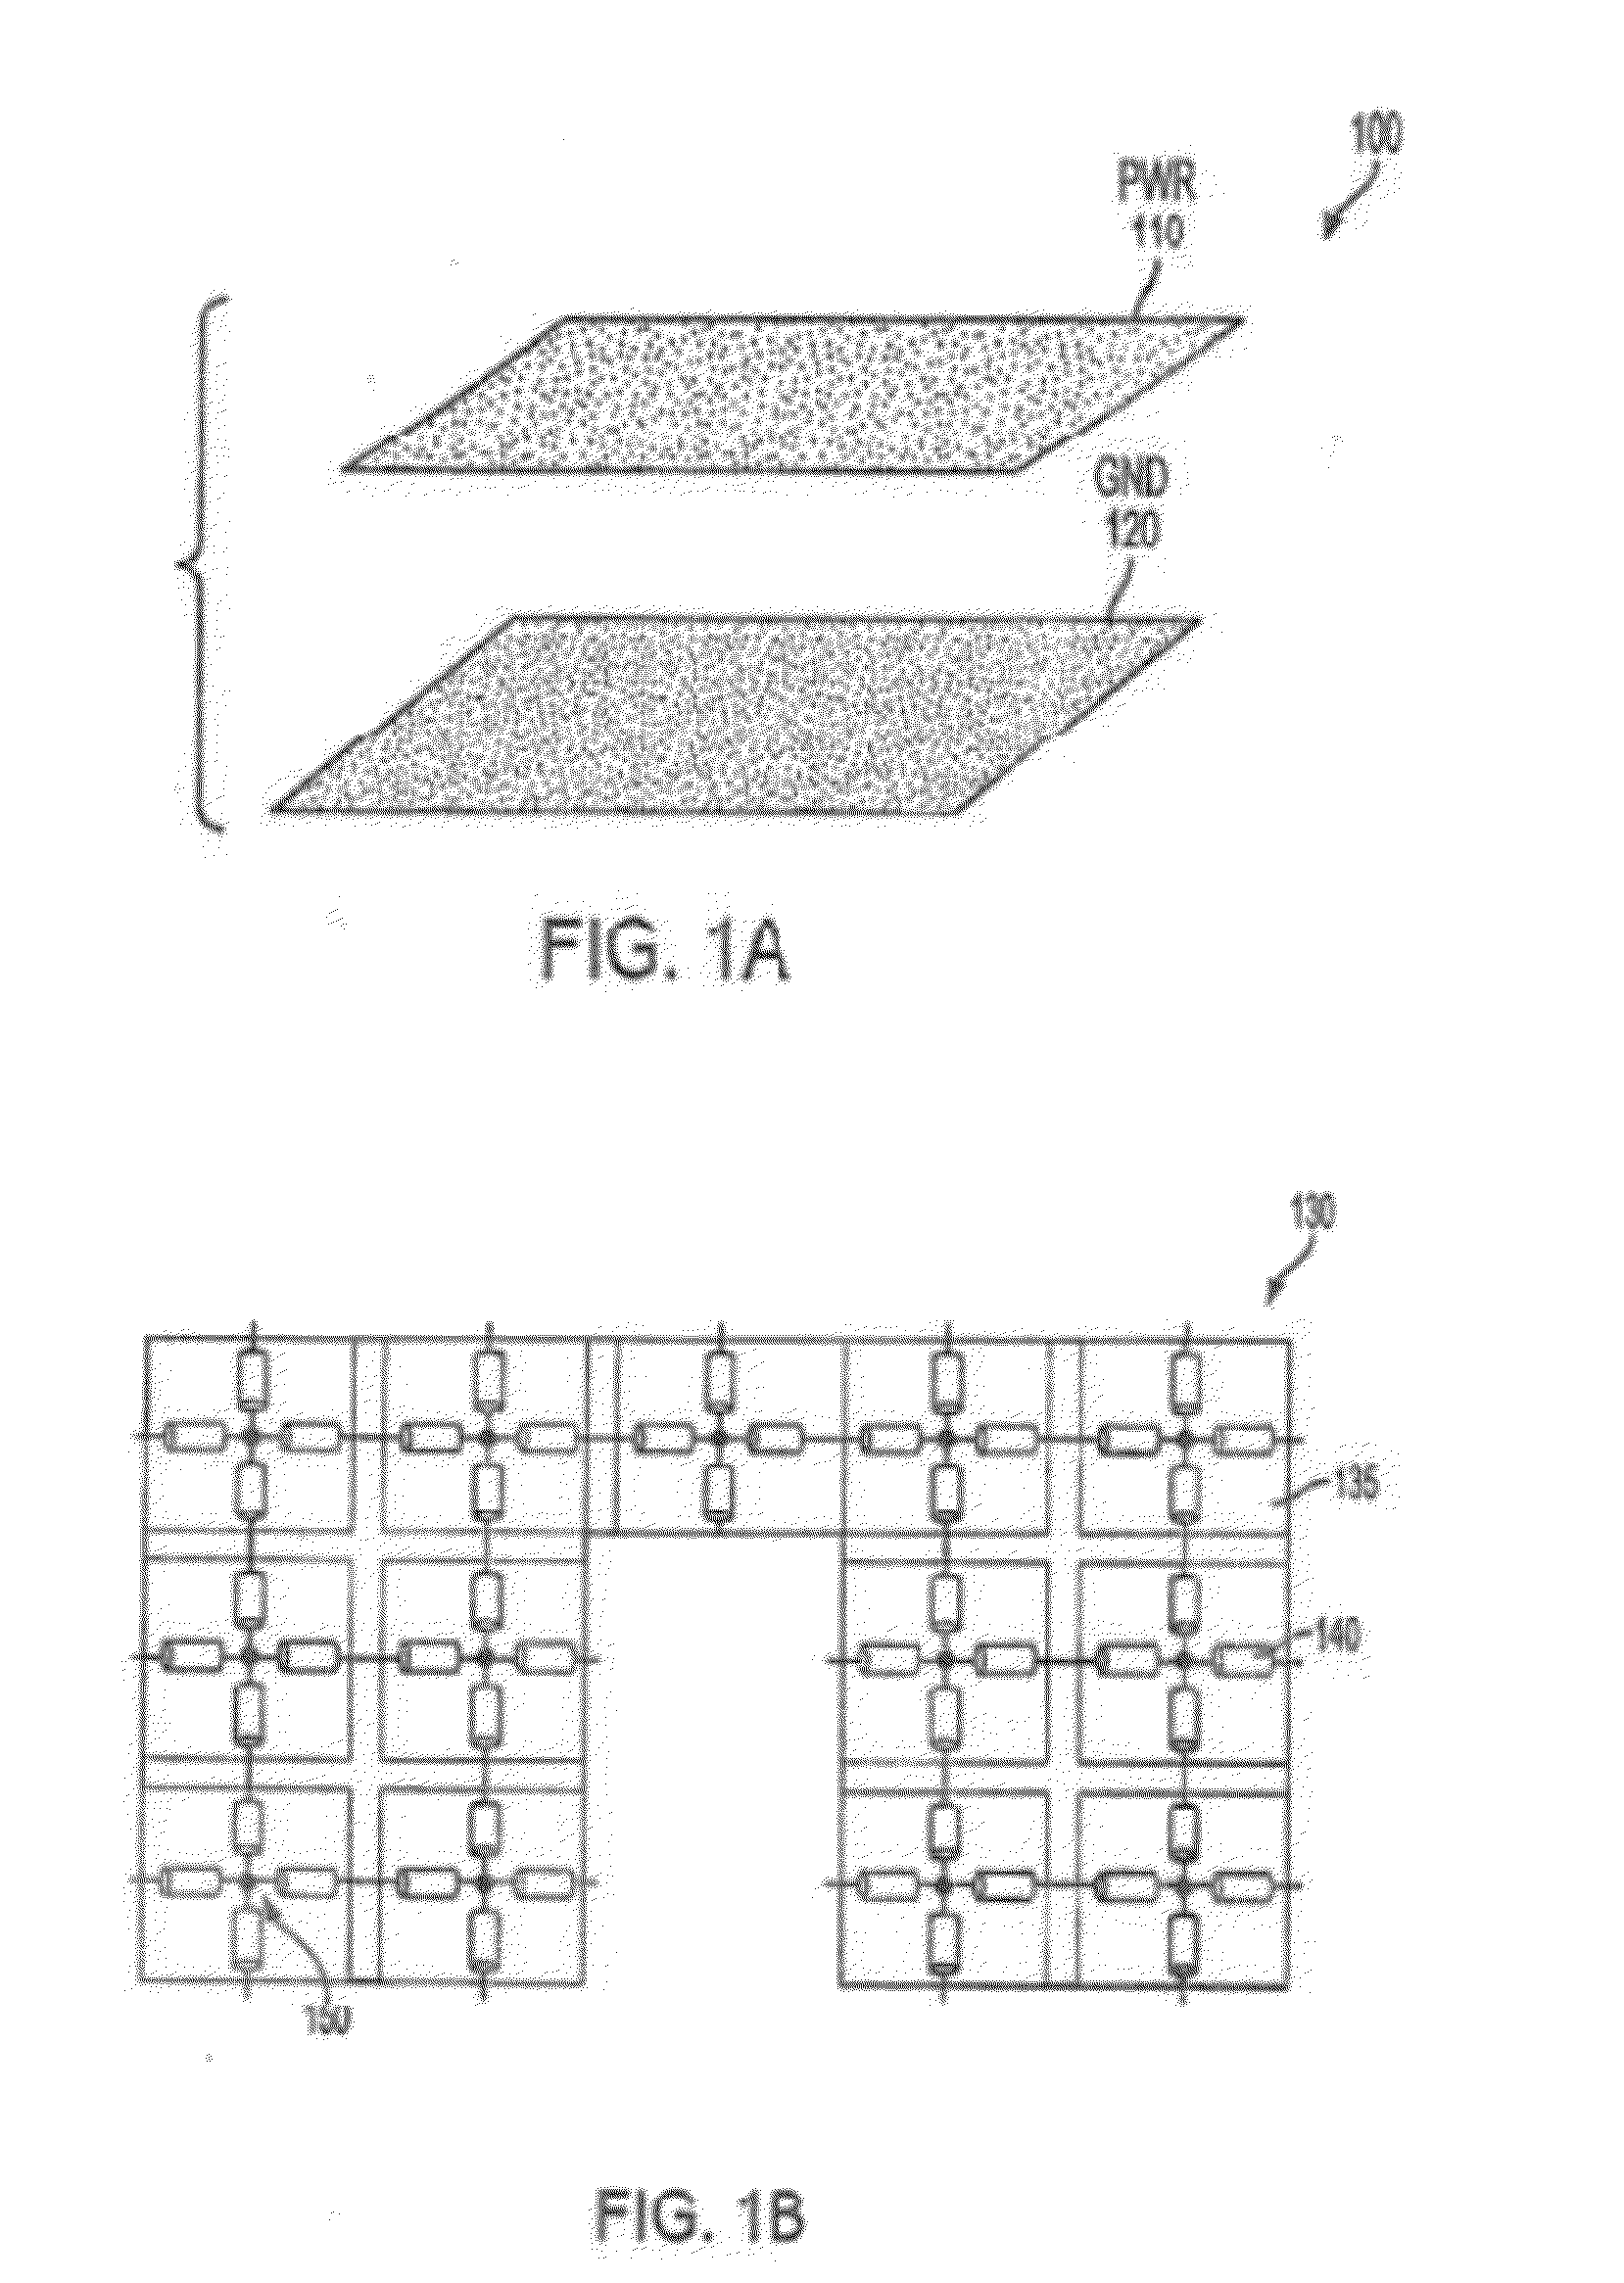 Method and system for power delivery network analysis